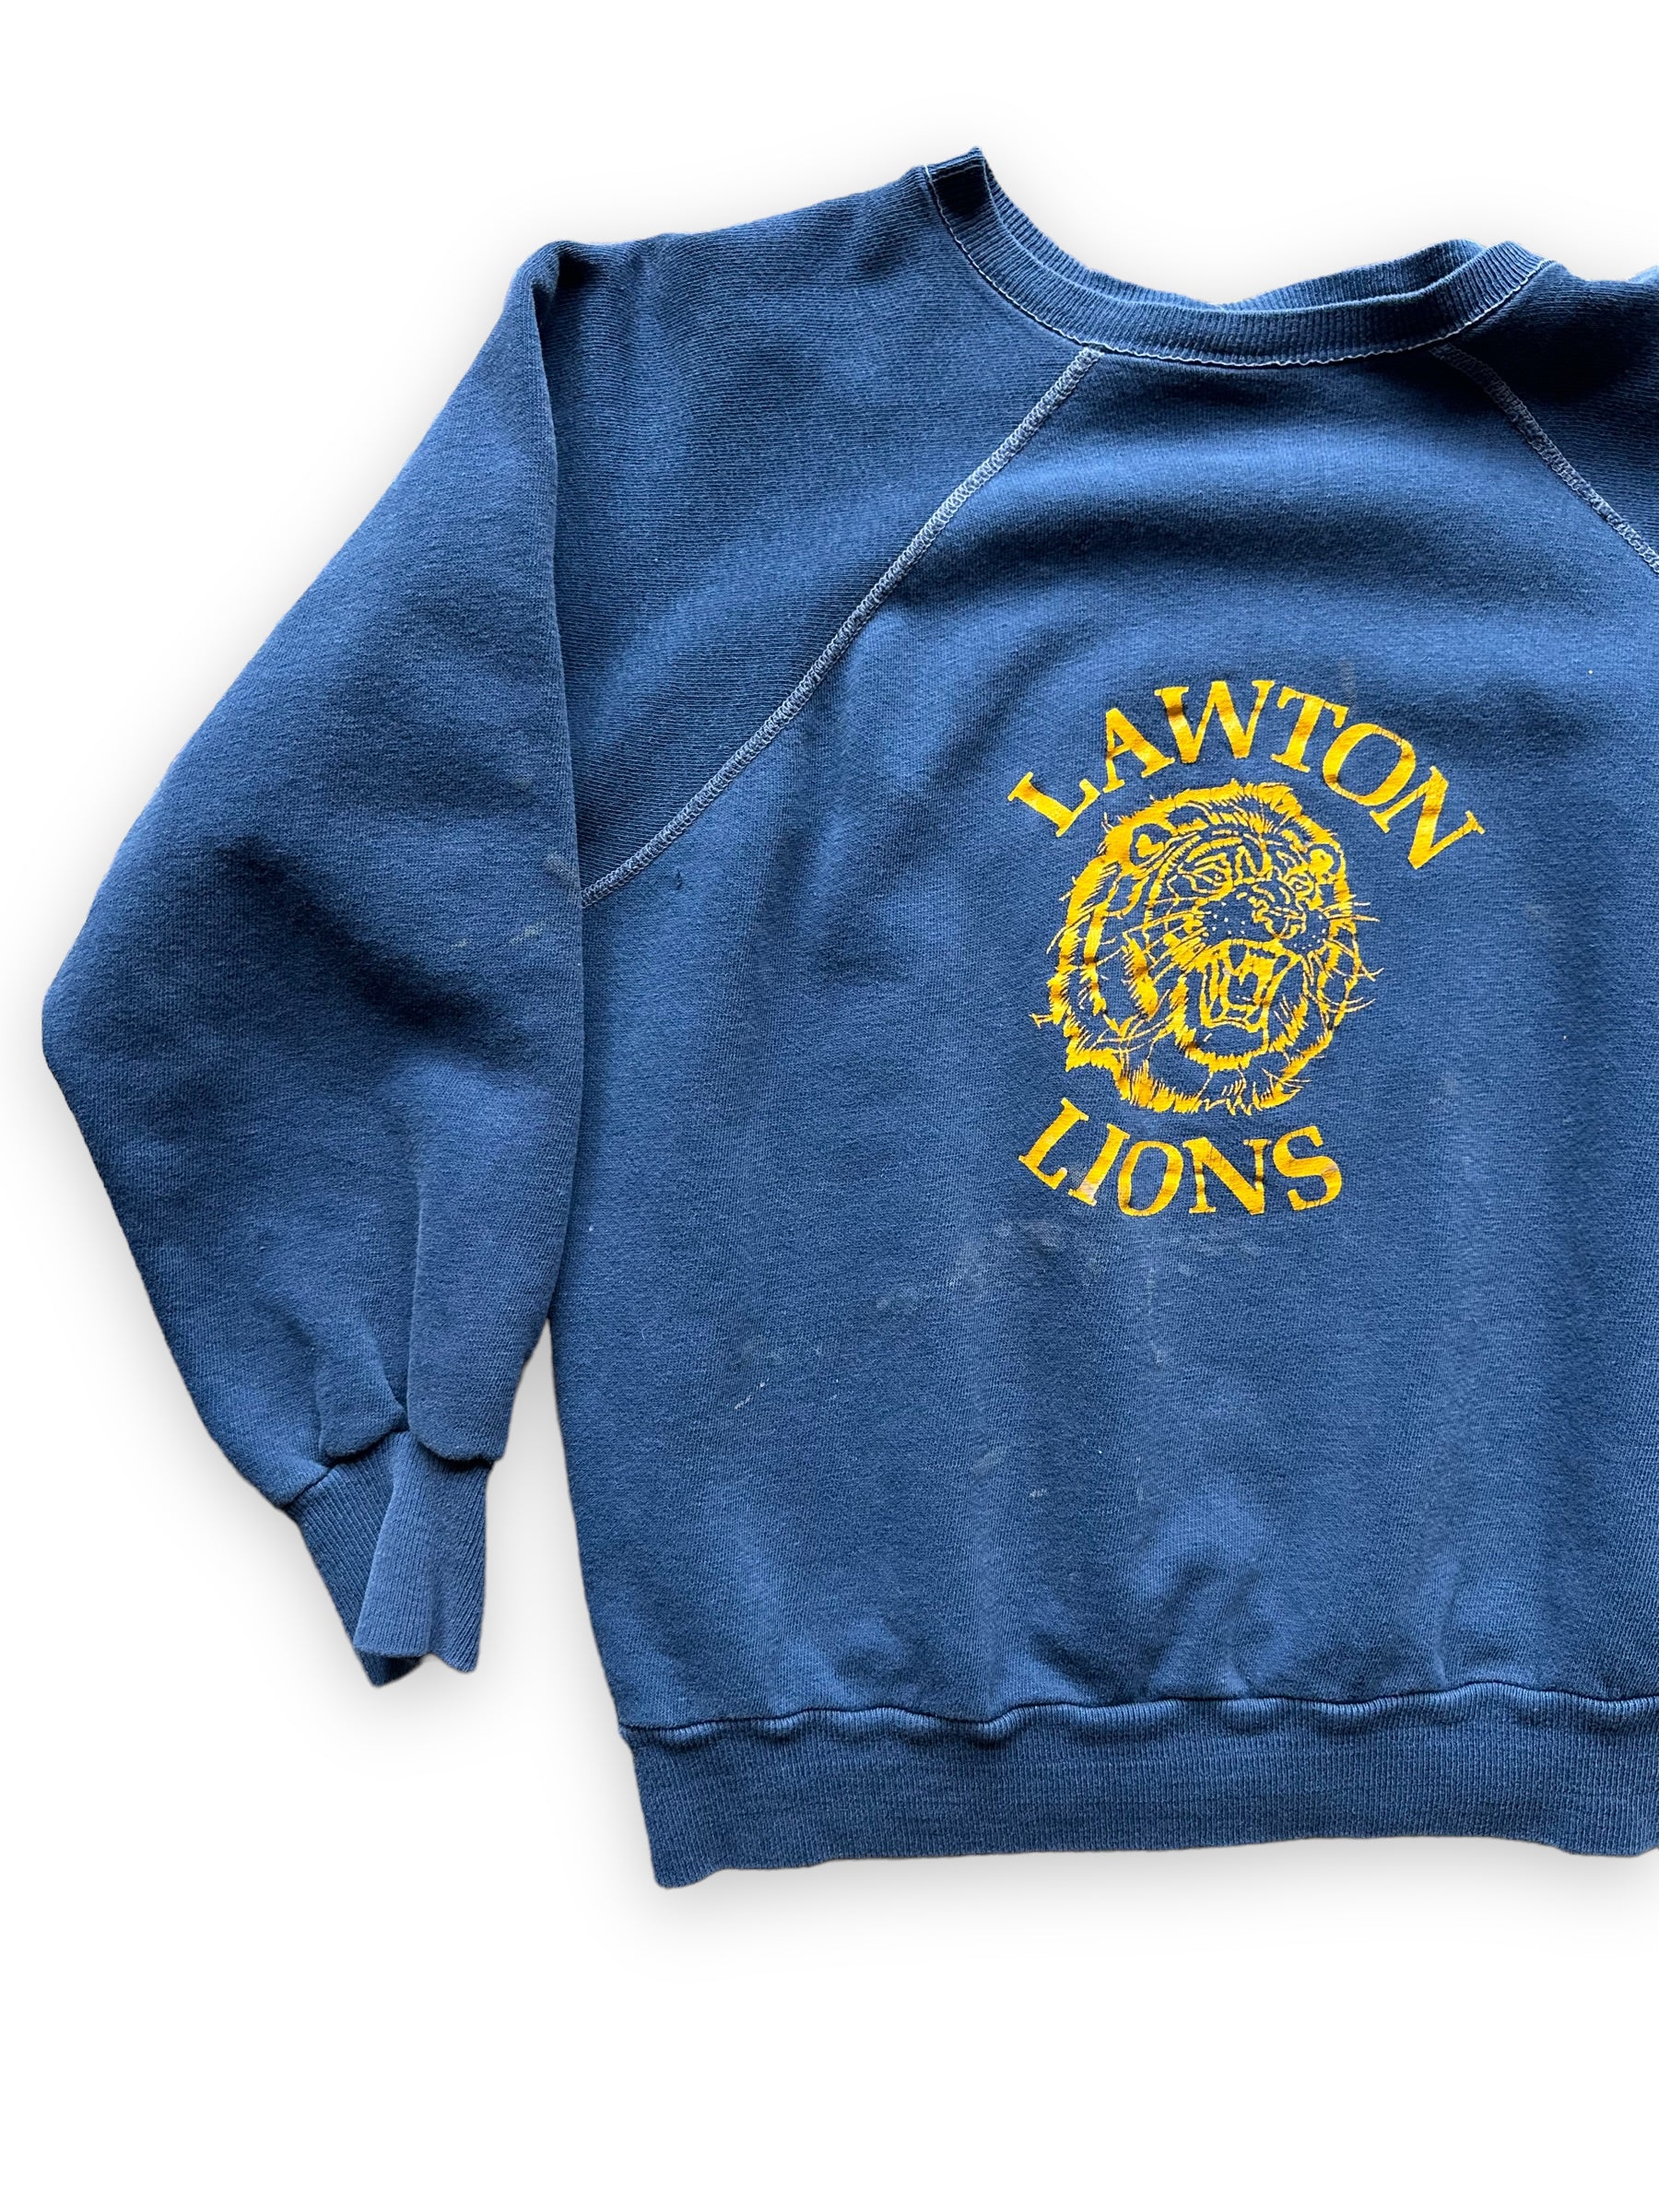 Front Right View on Vintage Small Lawton Lions Crewneck Sweatshirt | Vintage Crewneck Sweatshirt Seattle | Barn Owl Vintage Clothing